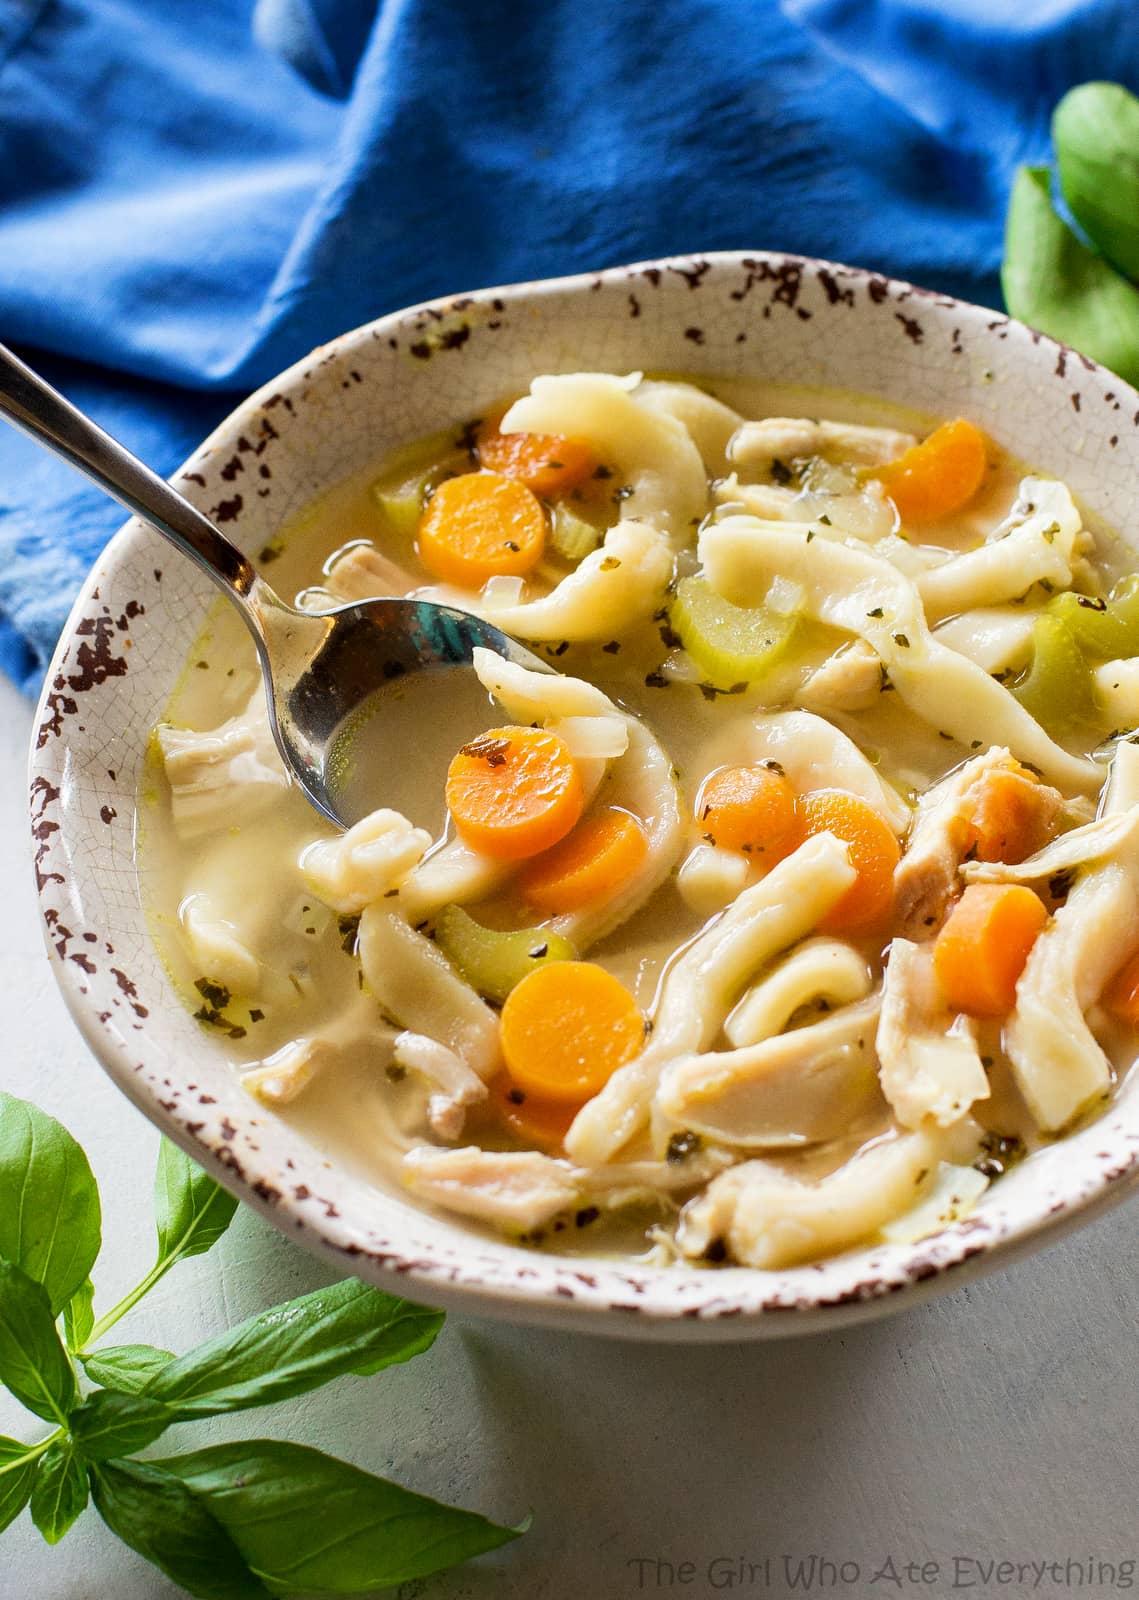 Homemade Chicken Noodle Soup - tried and true comfort food. A recipe for homemade noodles too but you can use store bought as well. #homemade #chicken #noodle #soup #recipe #dinner